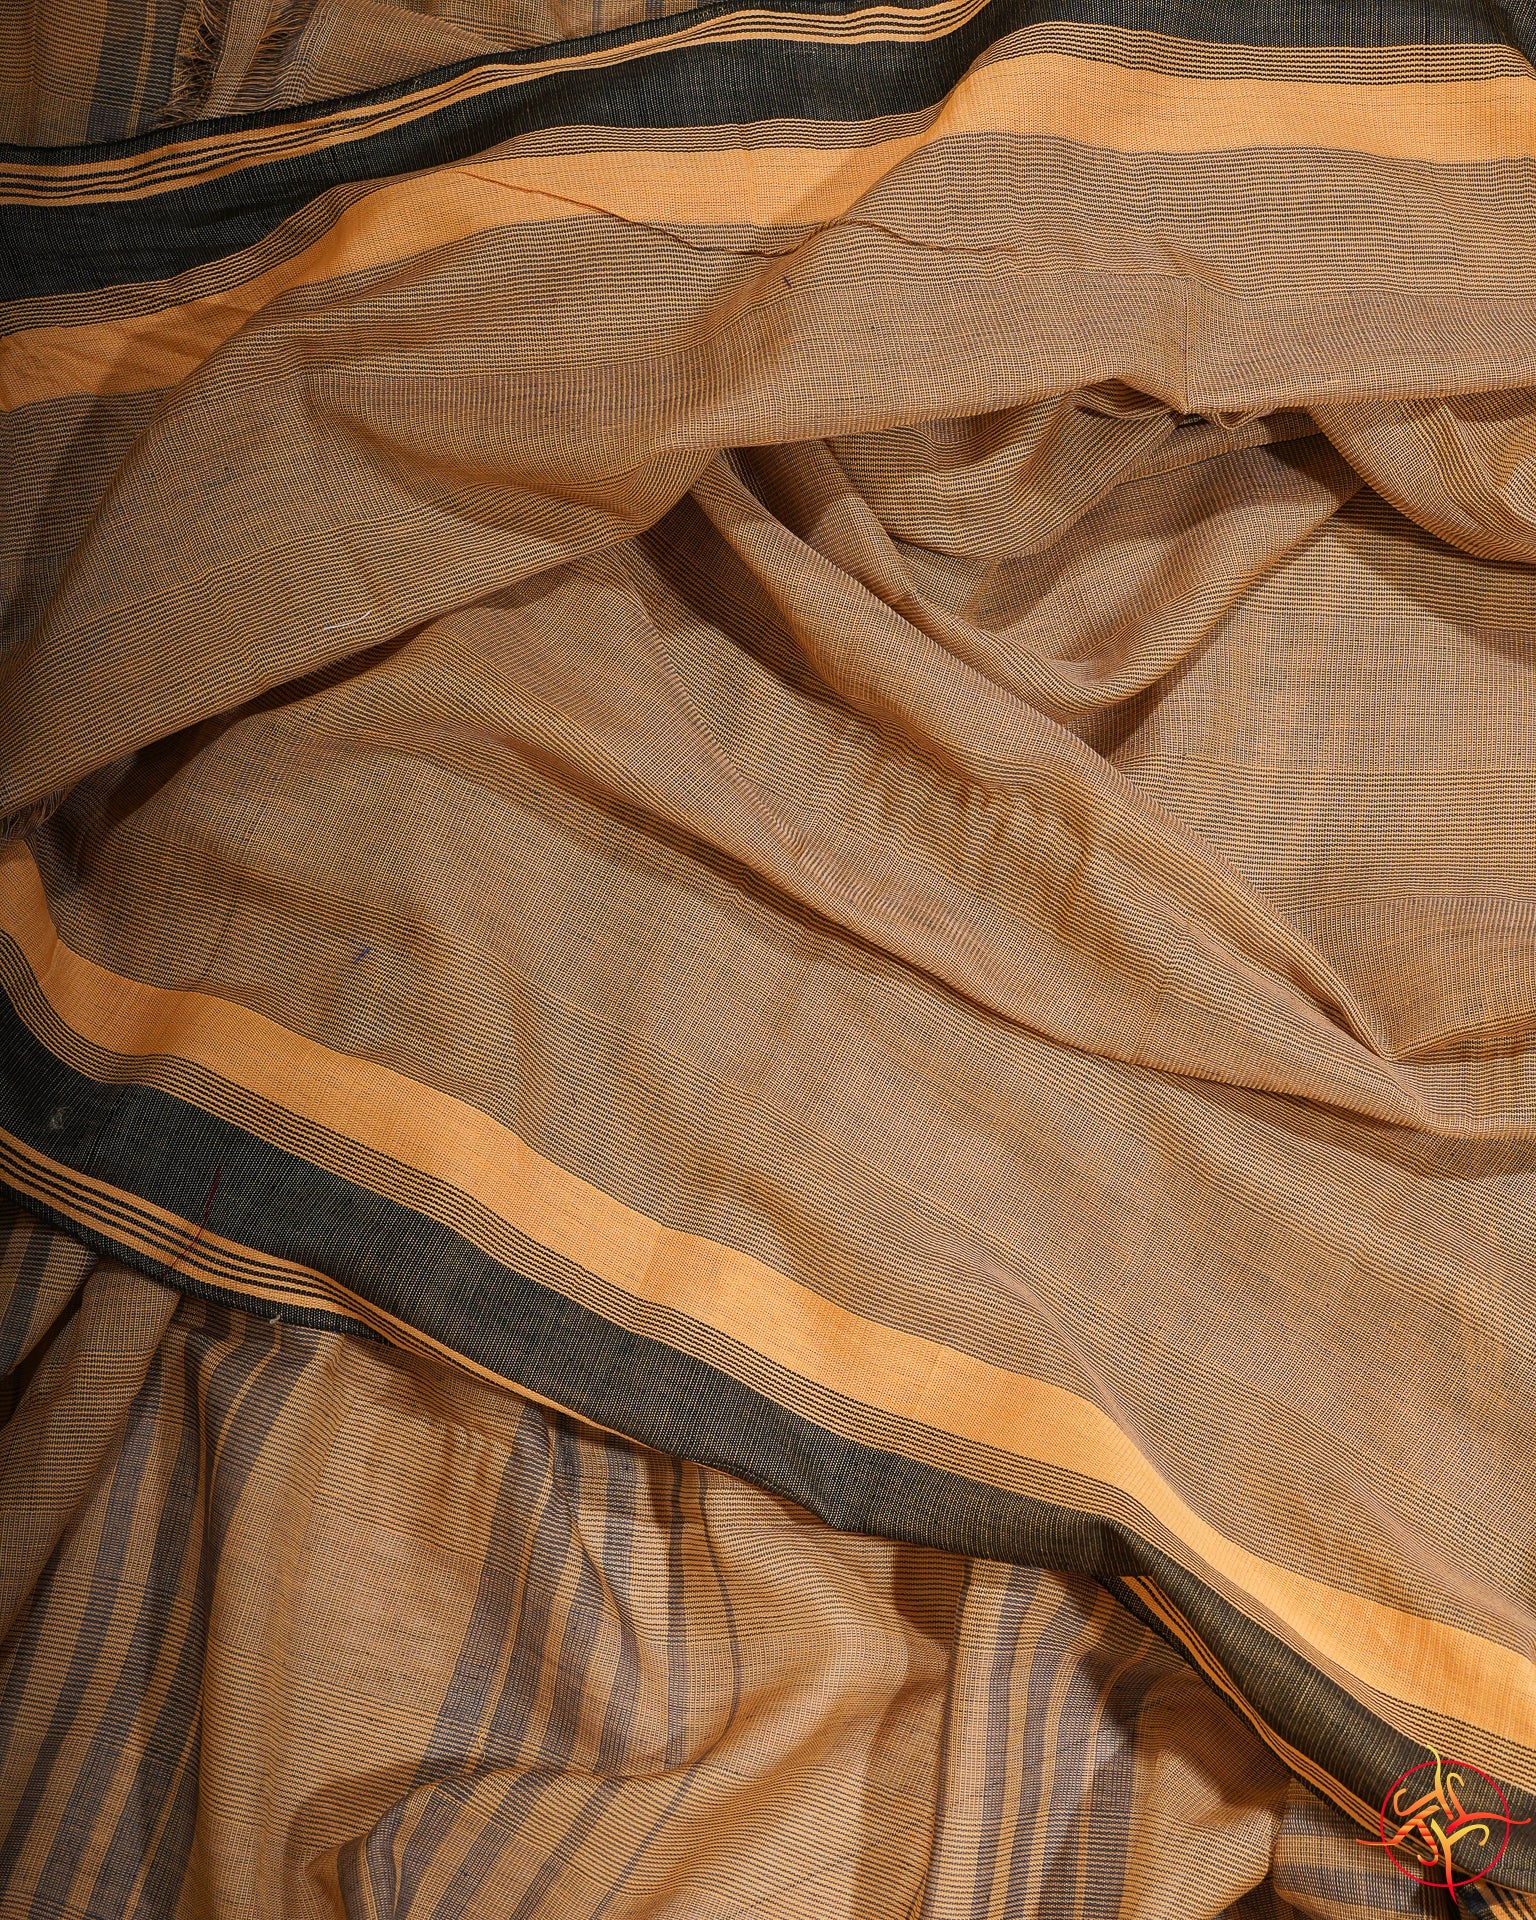 Saree&blouse cotton handwoven in earth colors